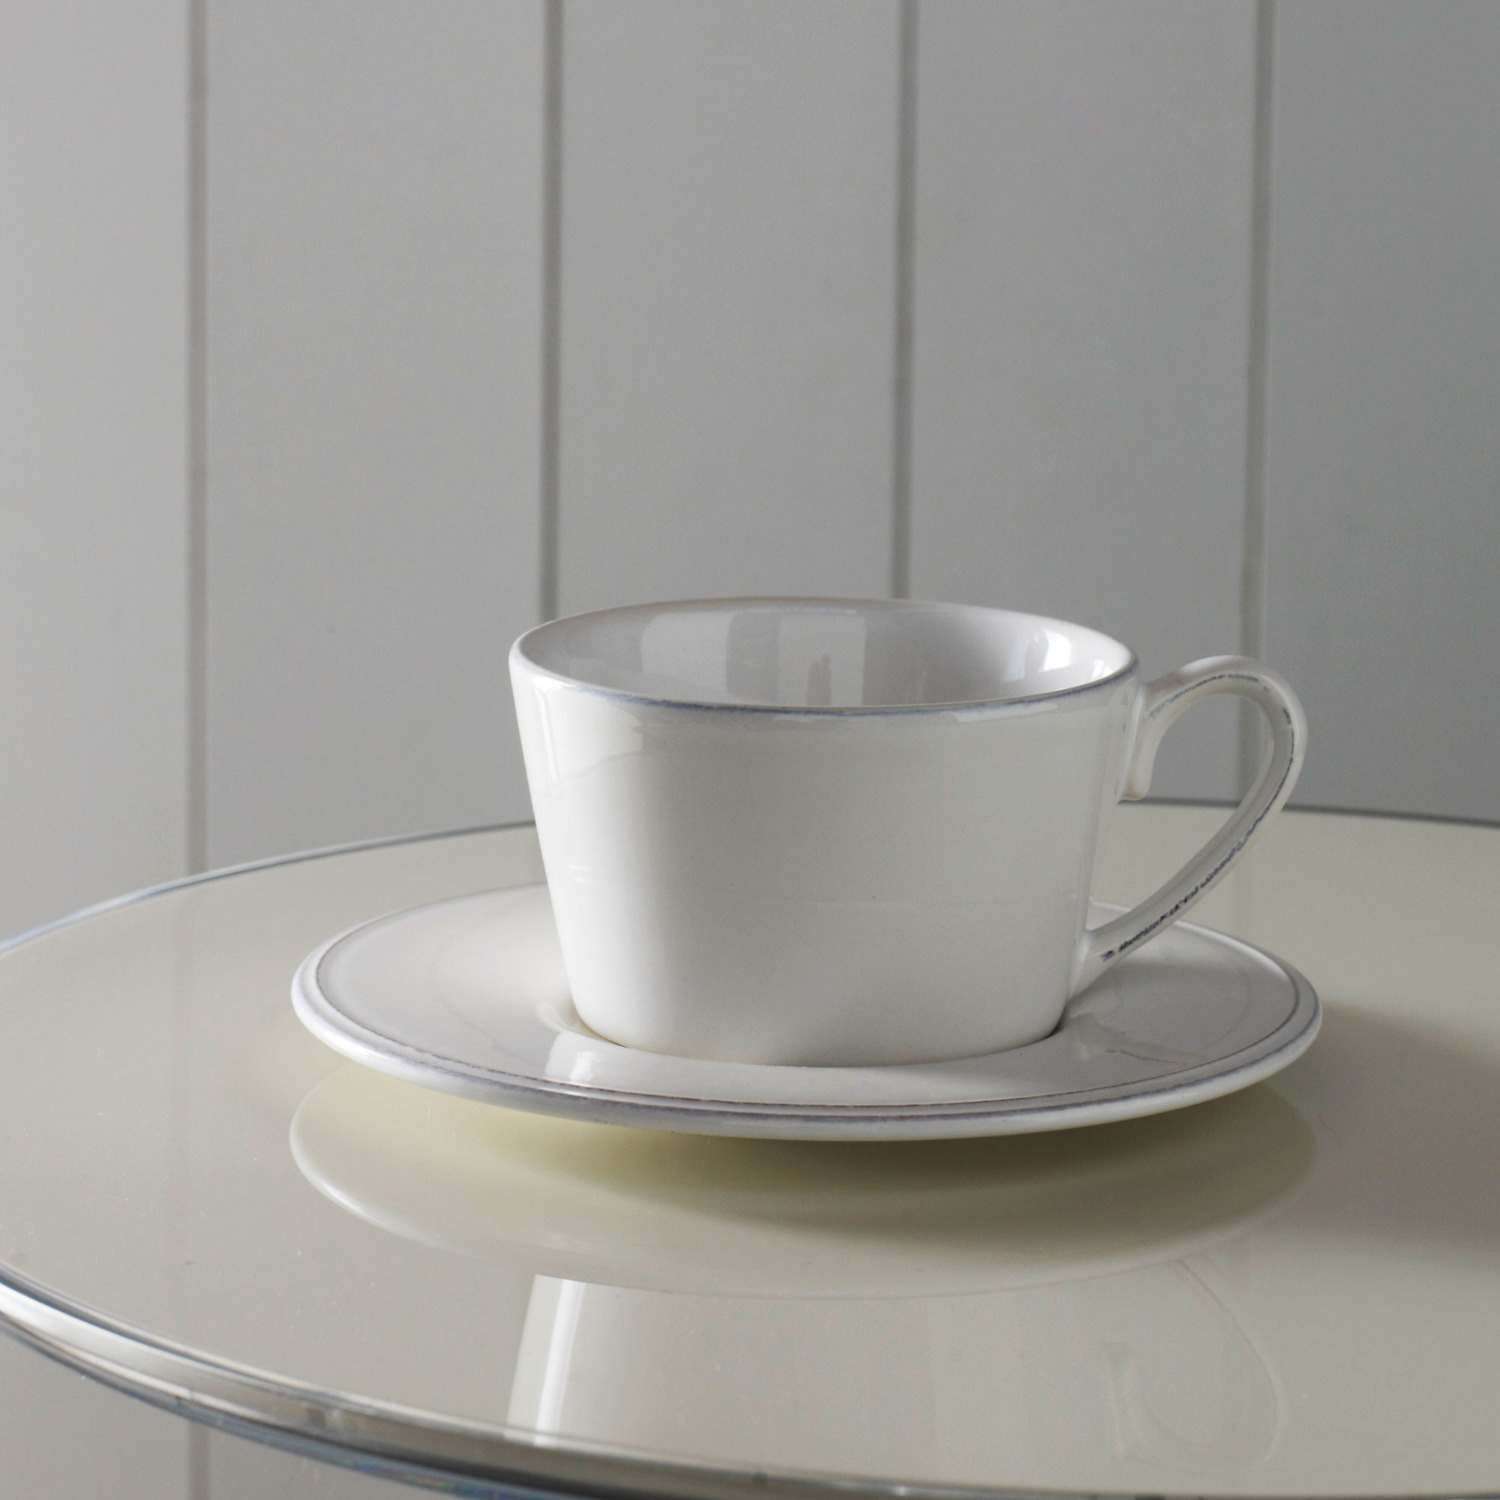 An image of Constance White Cup and Saucer